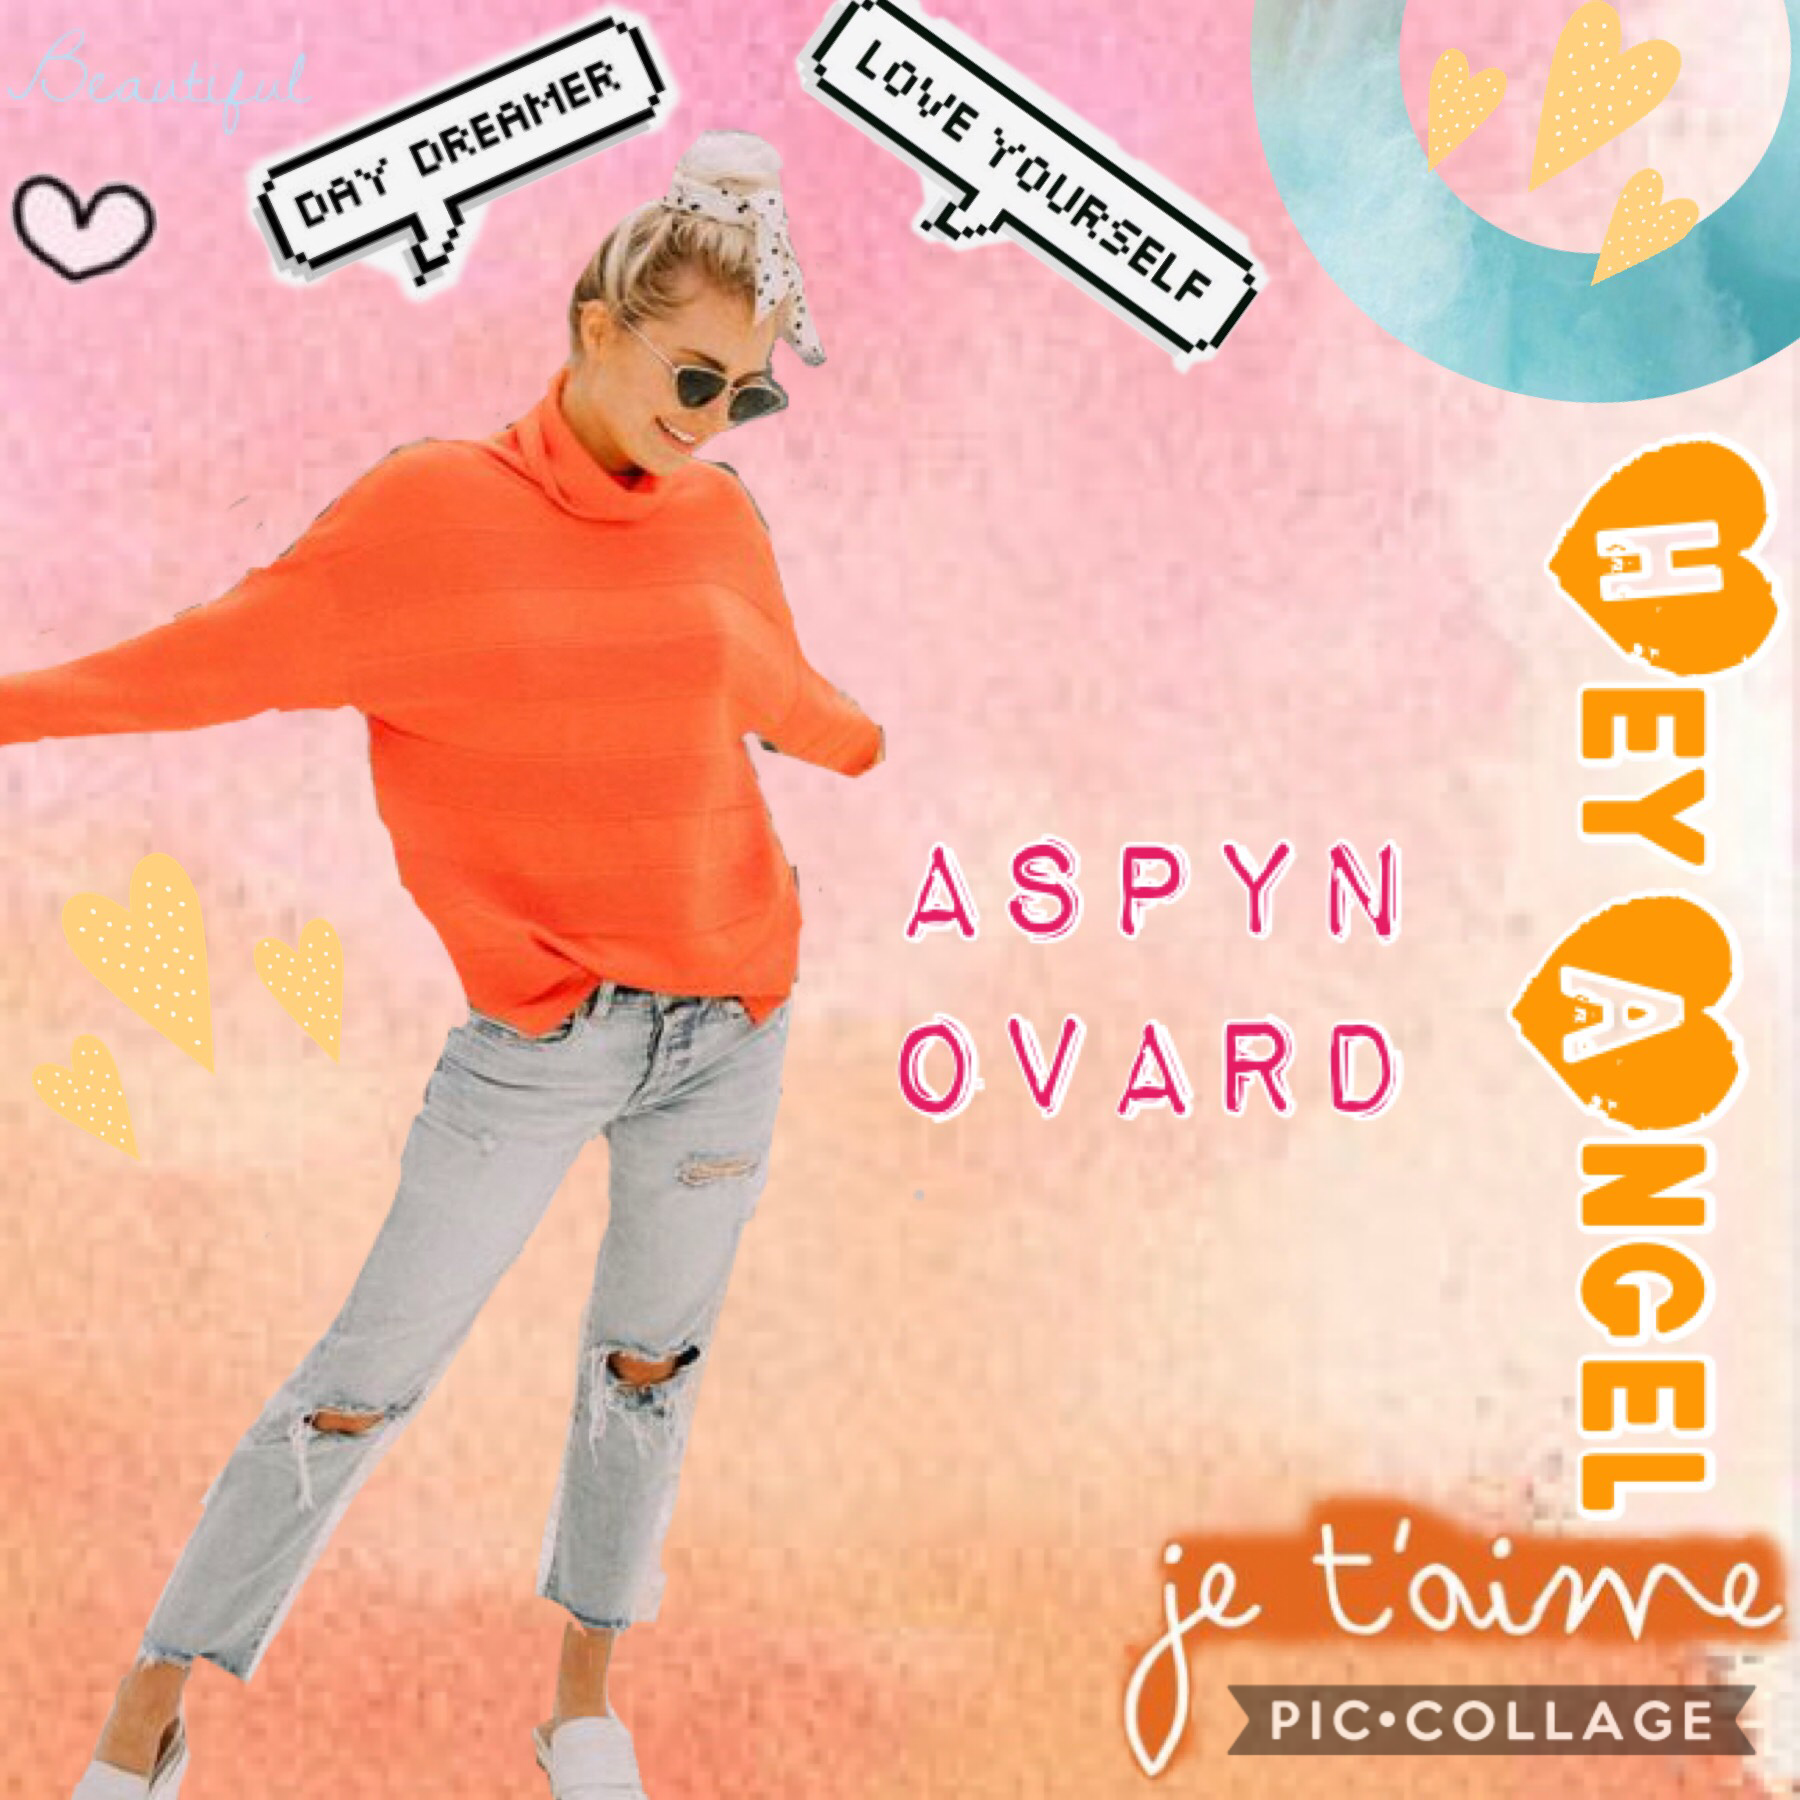 need some inspiration for future collages. Comment any ideas. 
💛💛💛aspyn ovard. 💛💛💛